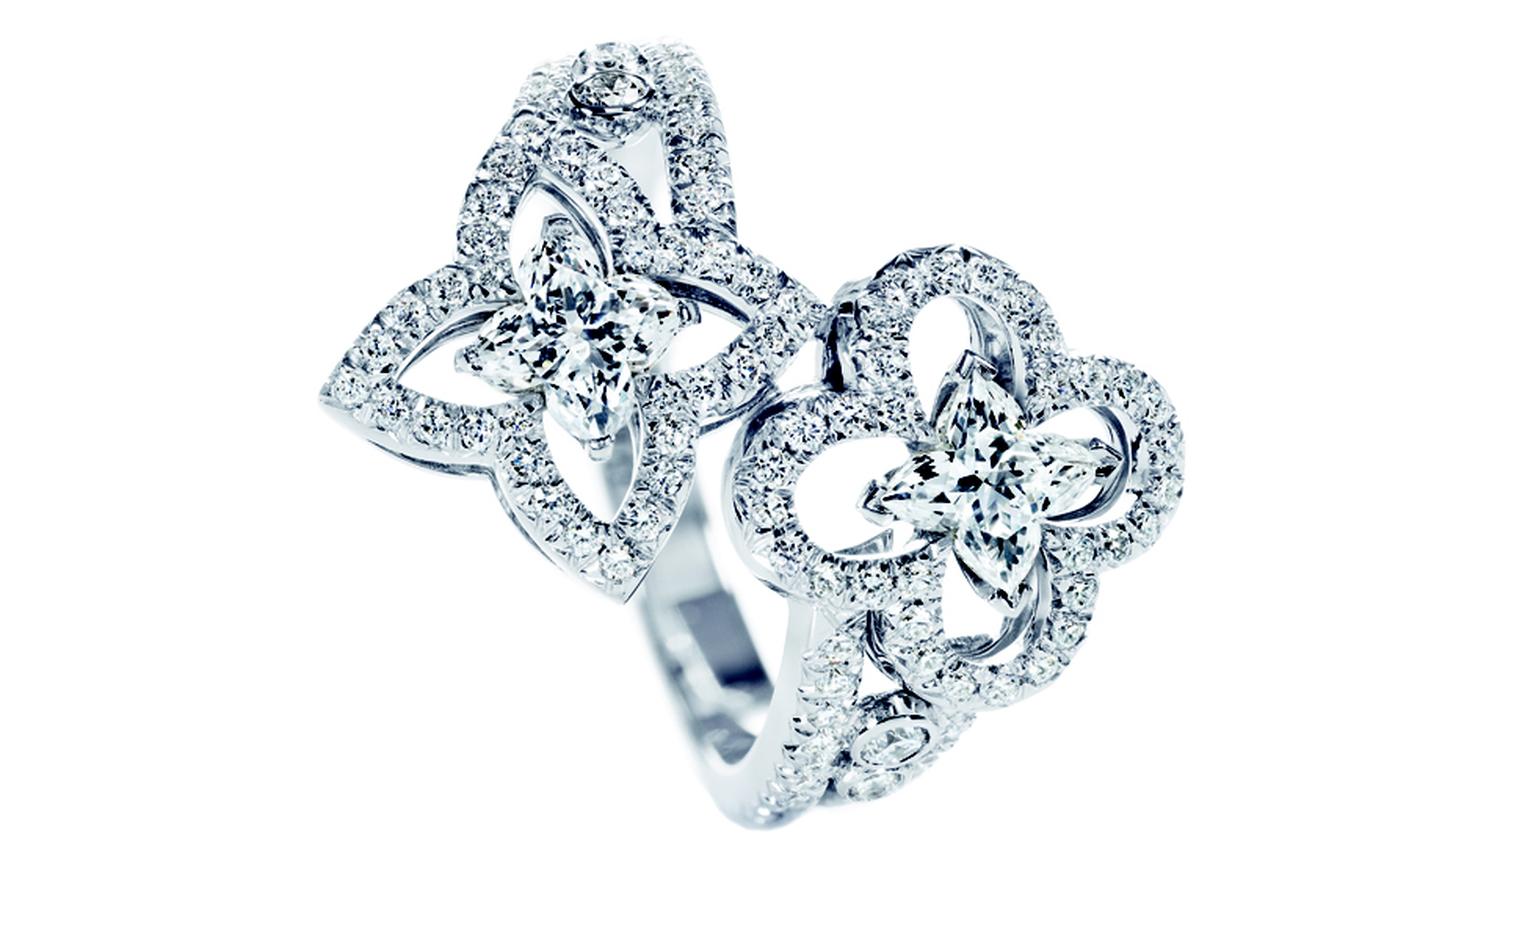 LOUIS VUITTON LES ARDENTES FLOWER RING 50 WHITE GOLD 18K AND DIAMONDS RING  Silvery ref.685193 - Joli Closet